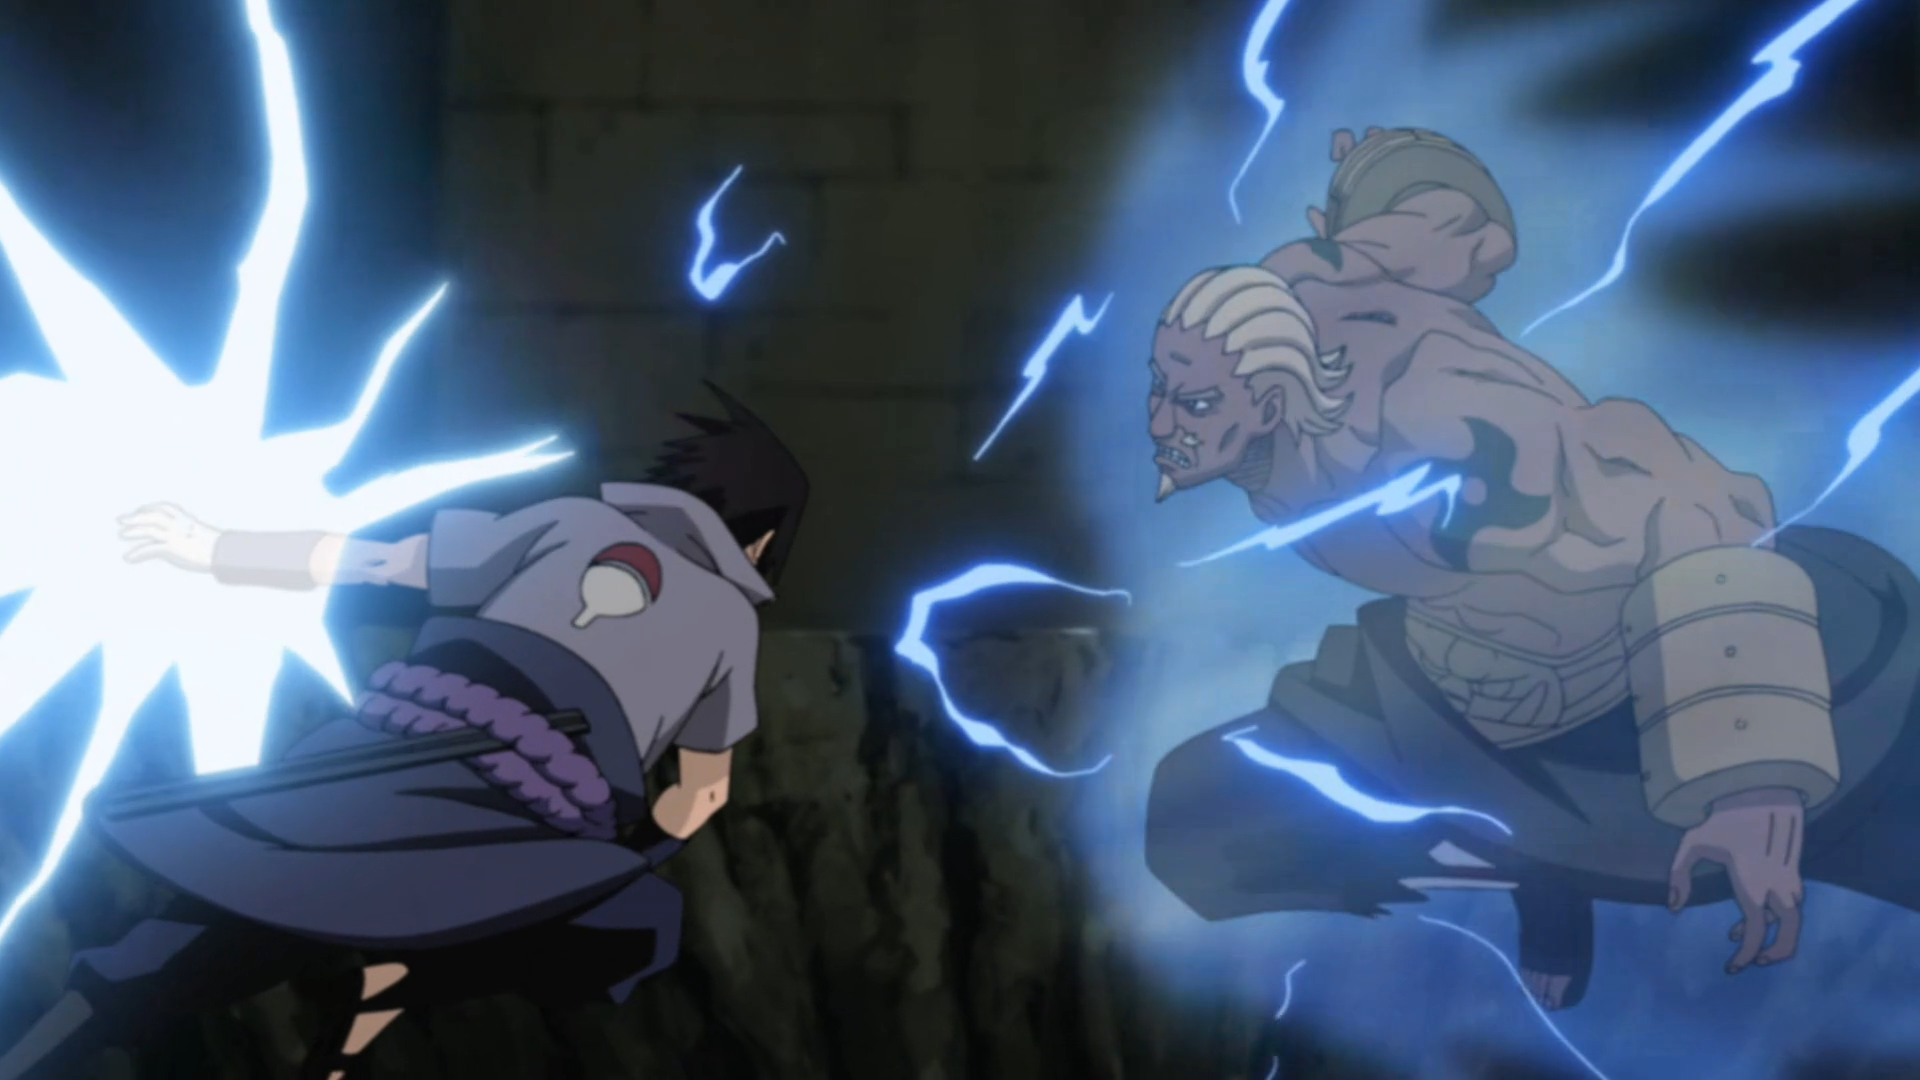 I've always found Sasuke's battle at the Five Kage Summit fascinating. You have to admire is relentlessness in trying to reach Danzo, but I also see the fight as symbolic